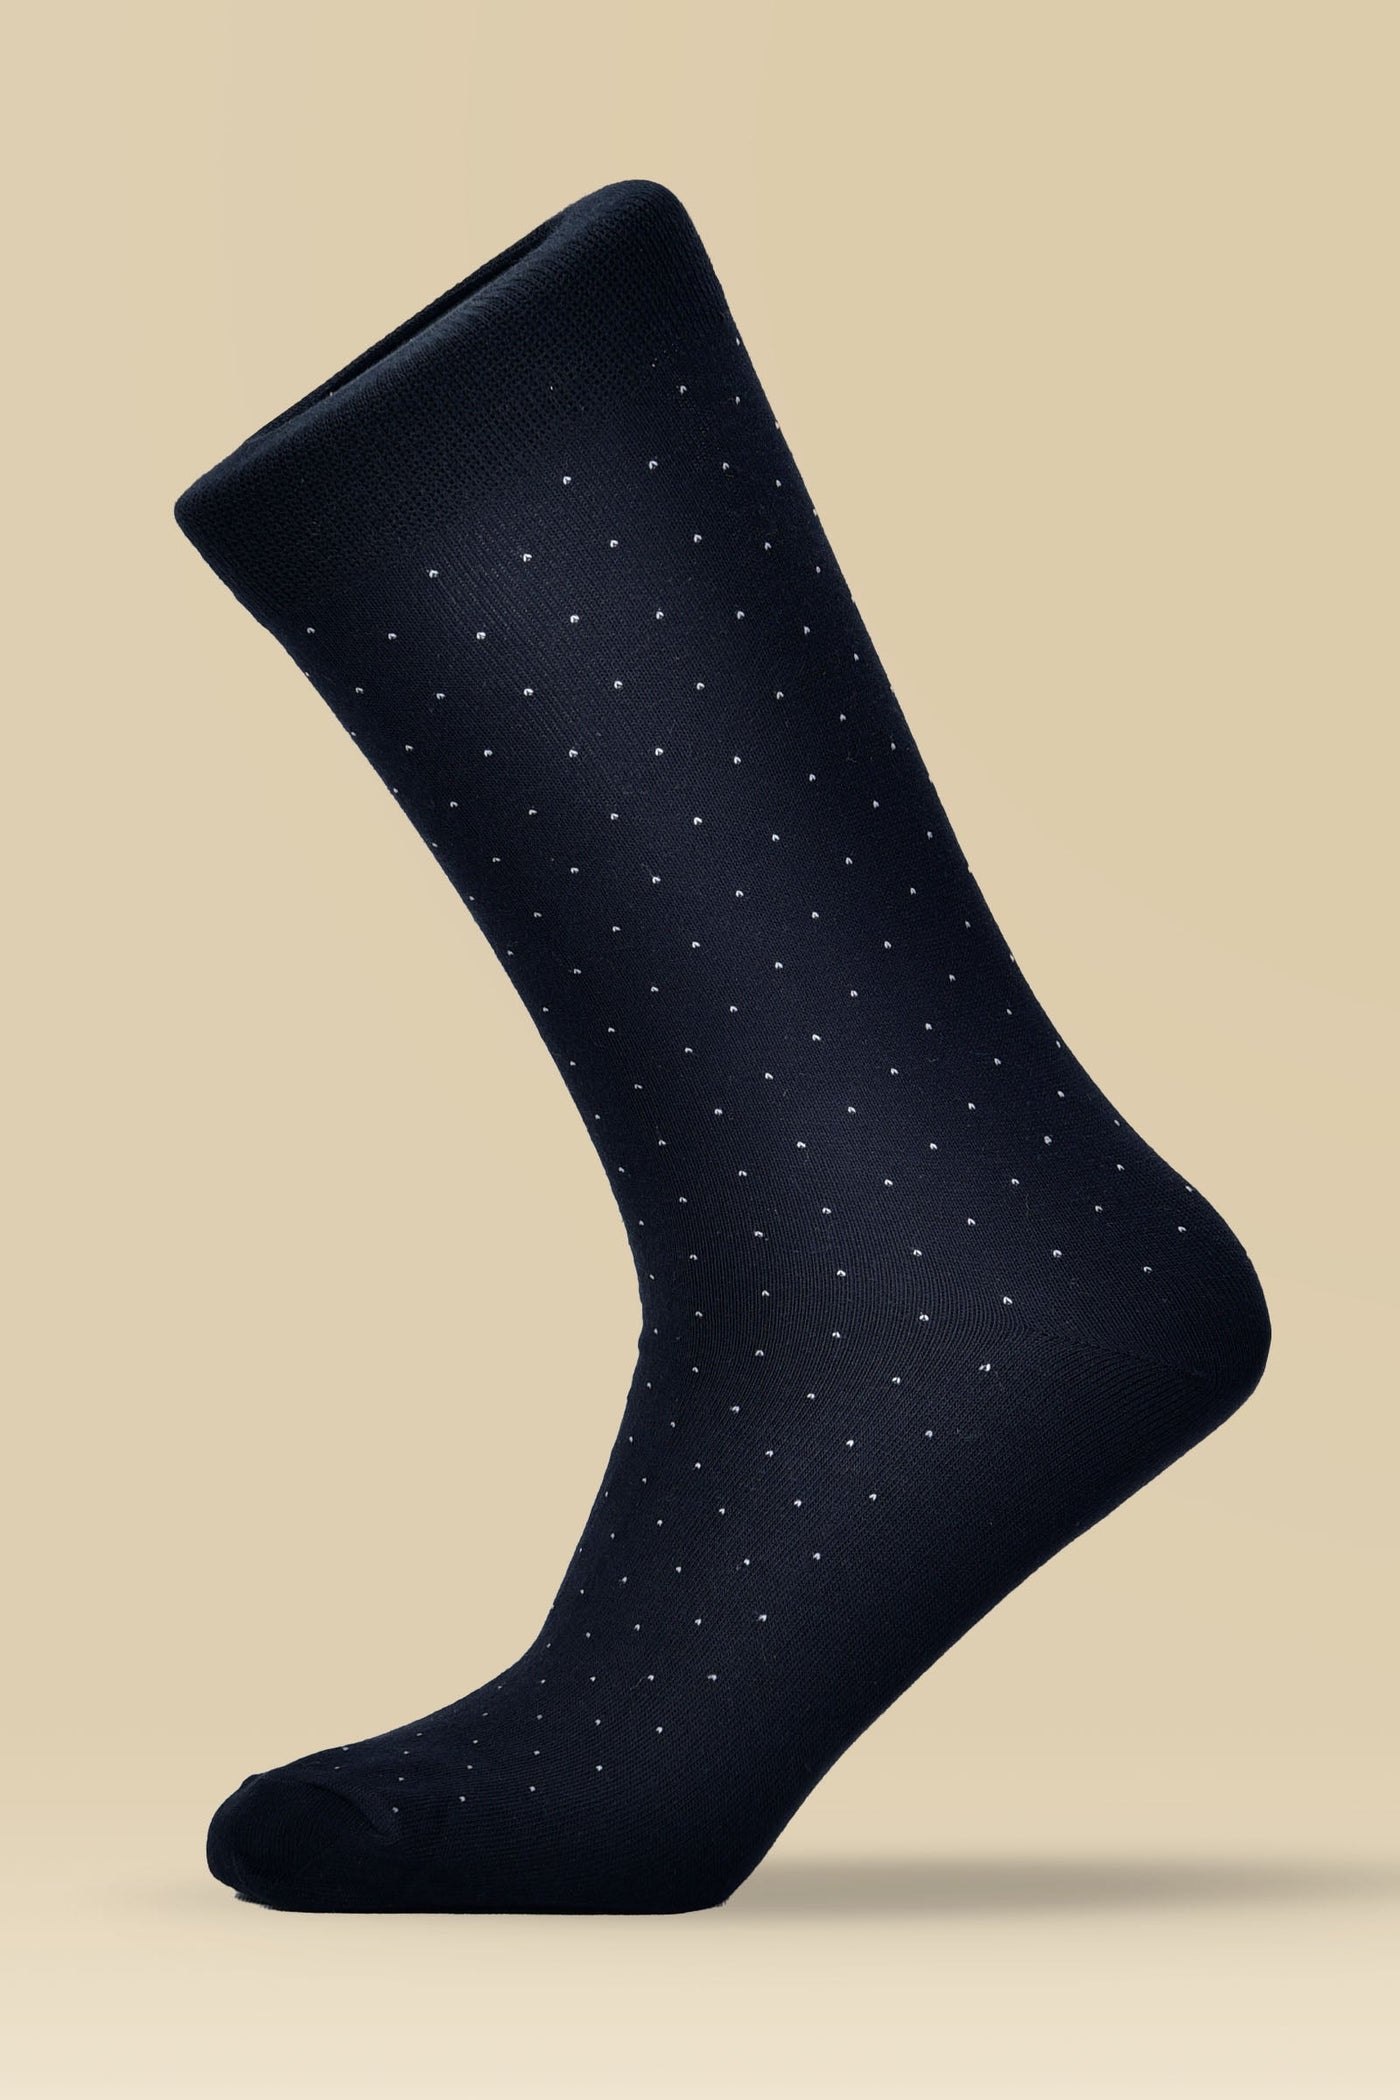 Dotted Black with White Combed Cotton Socks